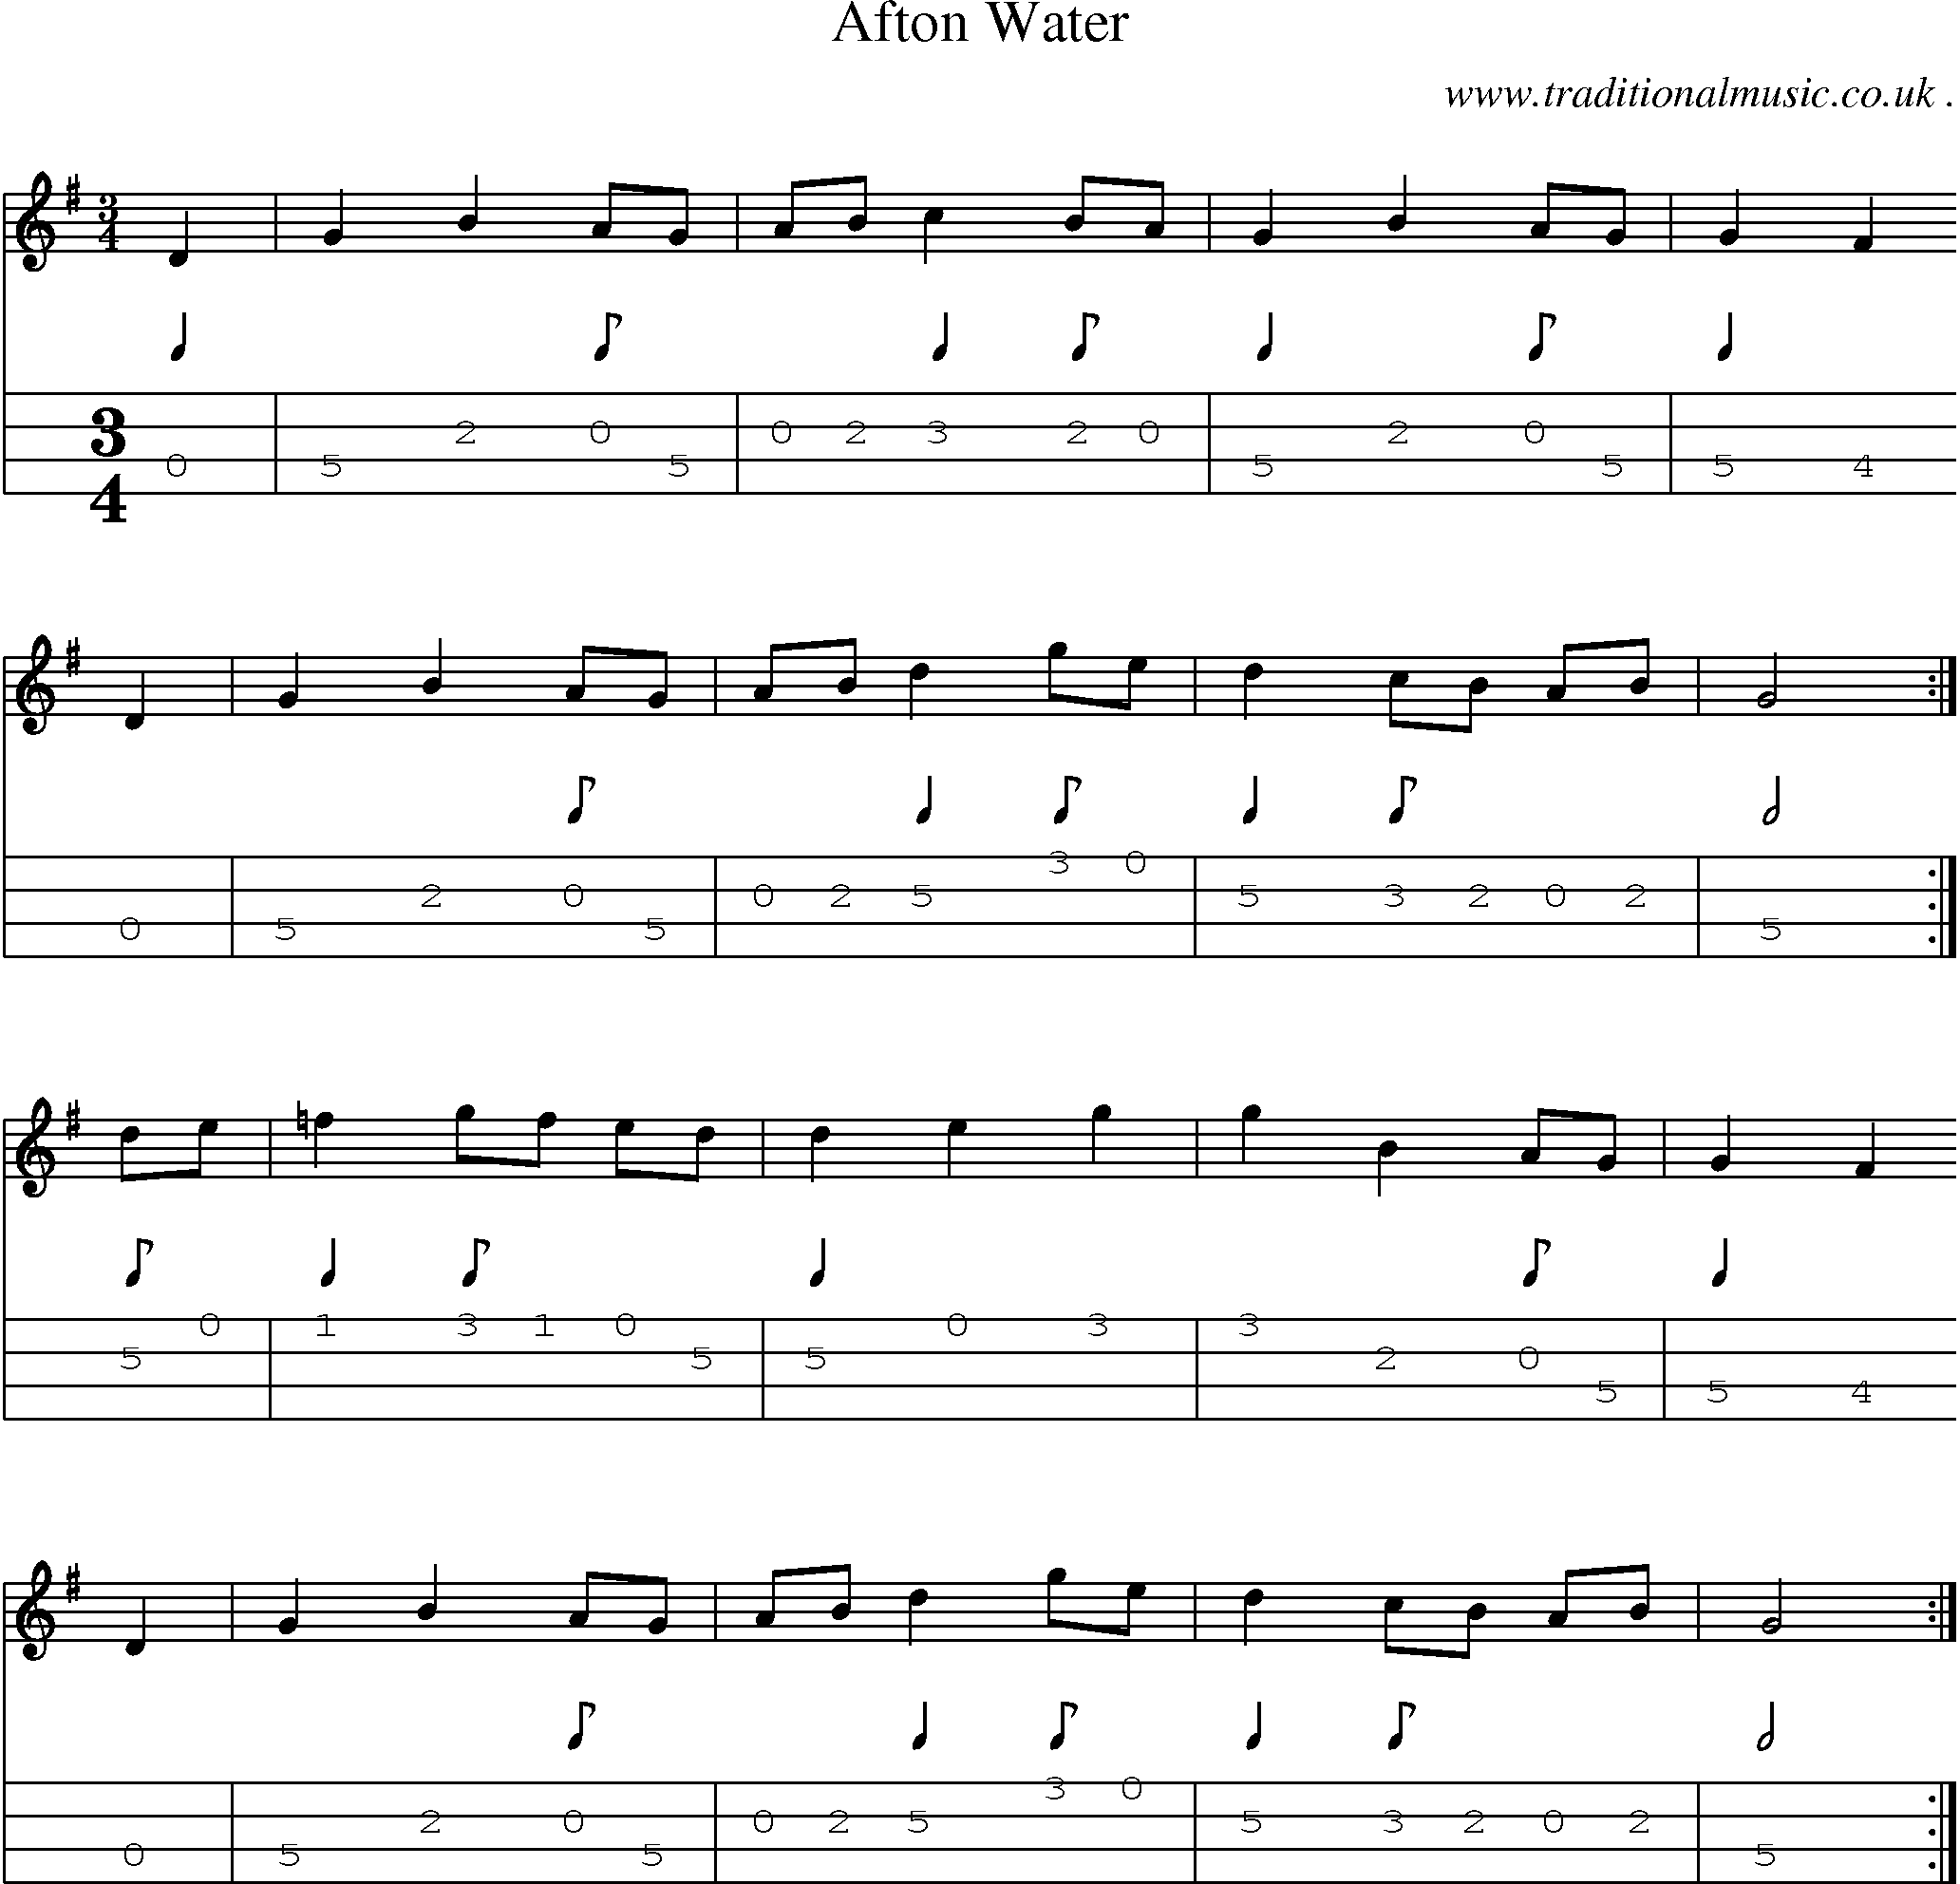 Sheet-music  score, Chords and Mandolin Tabs for Afton Water